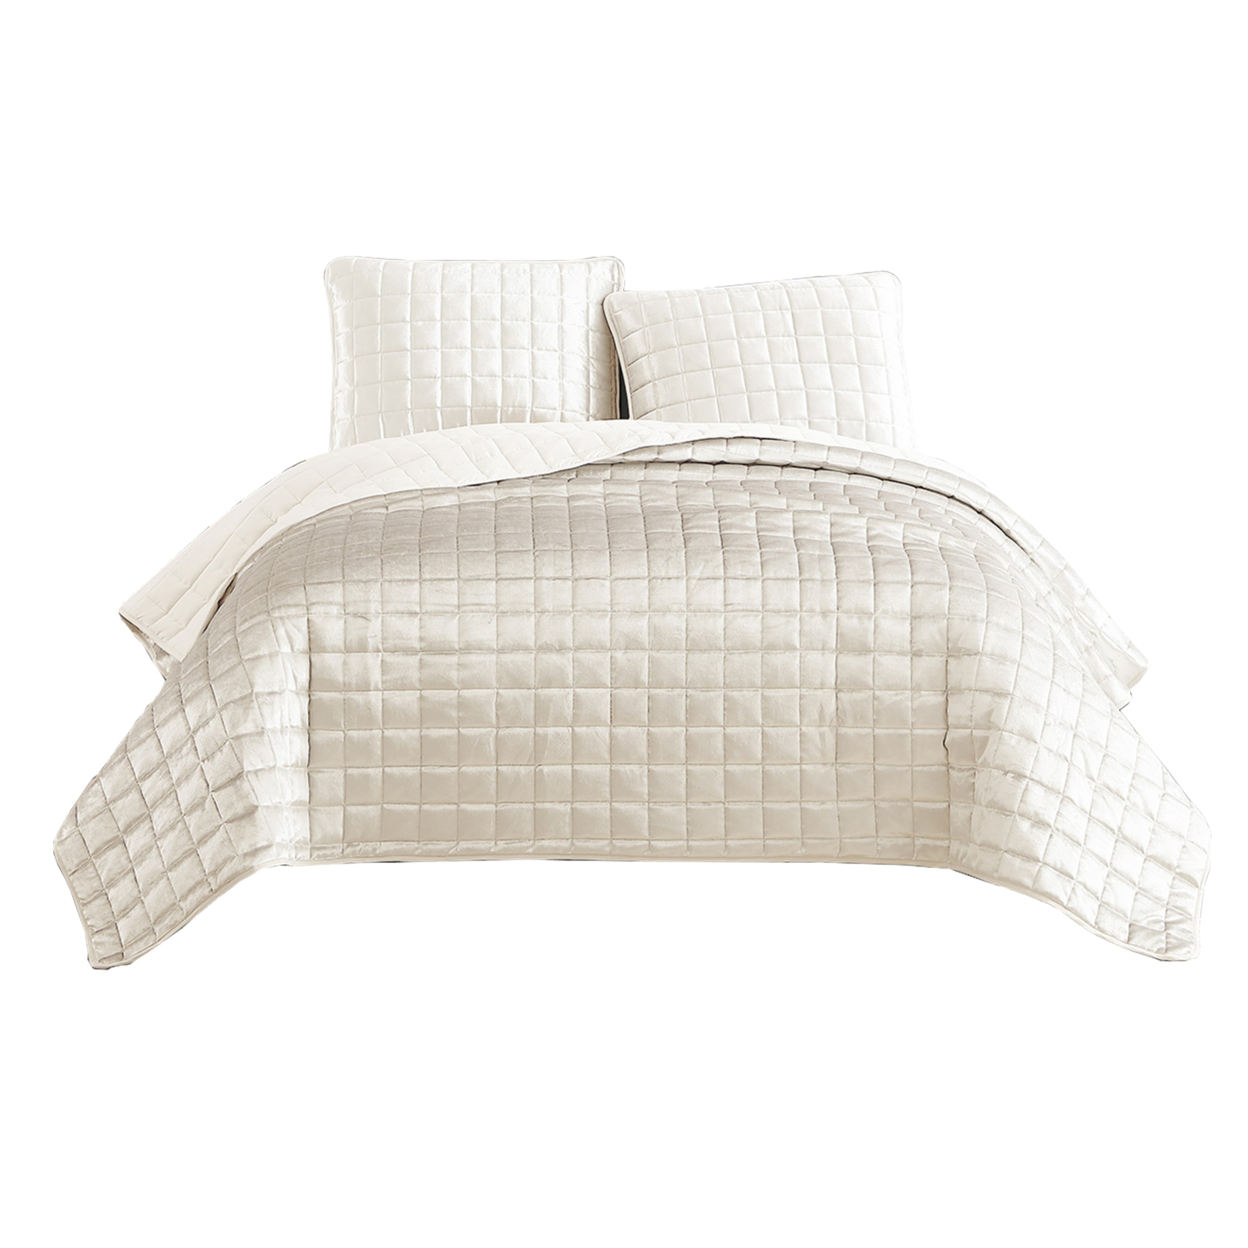 3 Piece Queen Size Coverlet Set With Stitched Square Pattern, Cream- Saltoro Sherpi